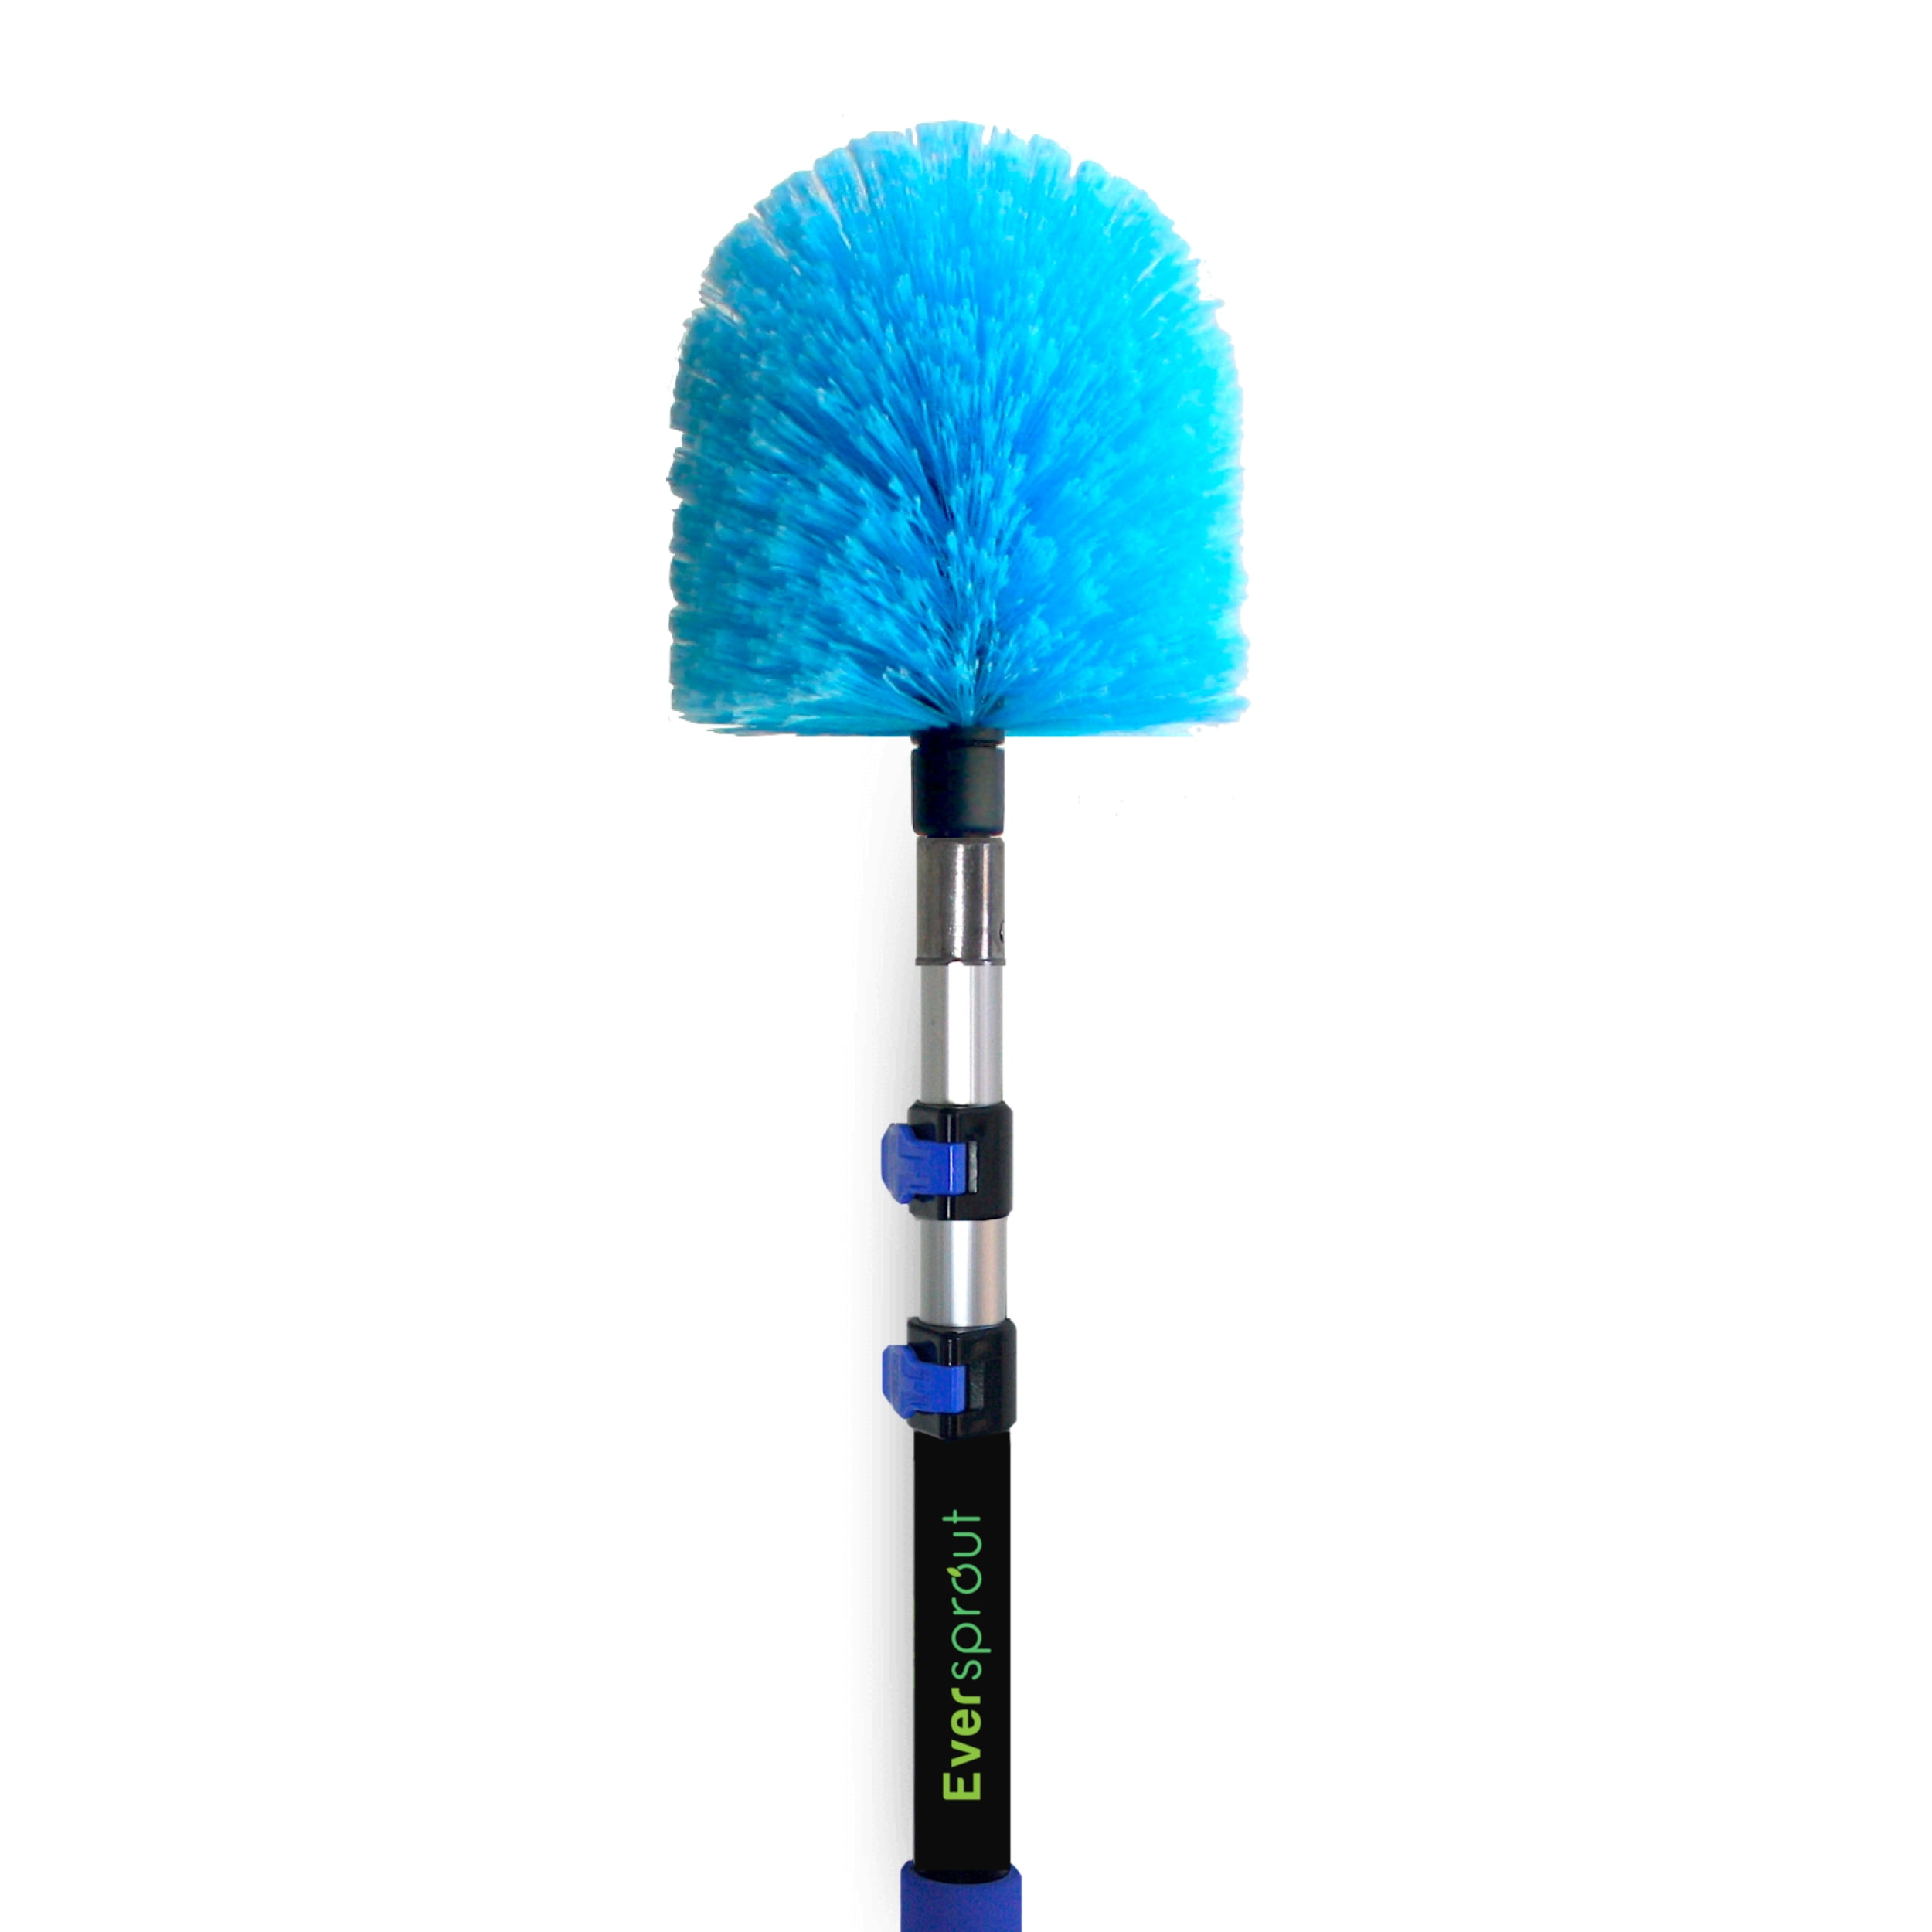 Italian threads converted to Acme threads M Cobweb Duster Brush 3 for $15.00 